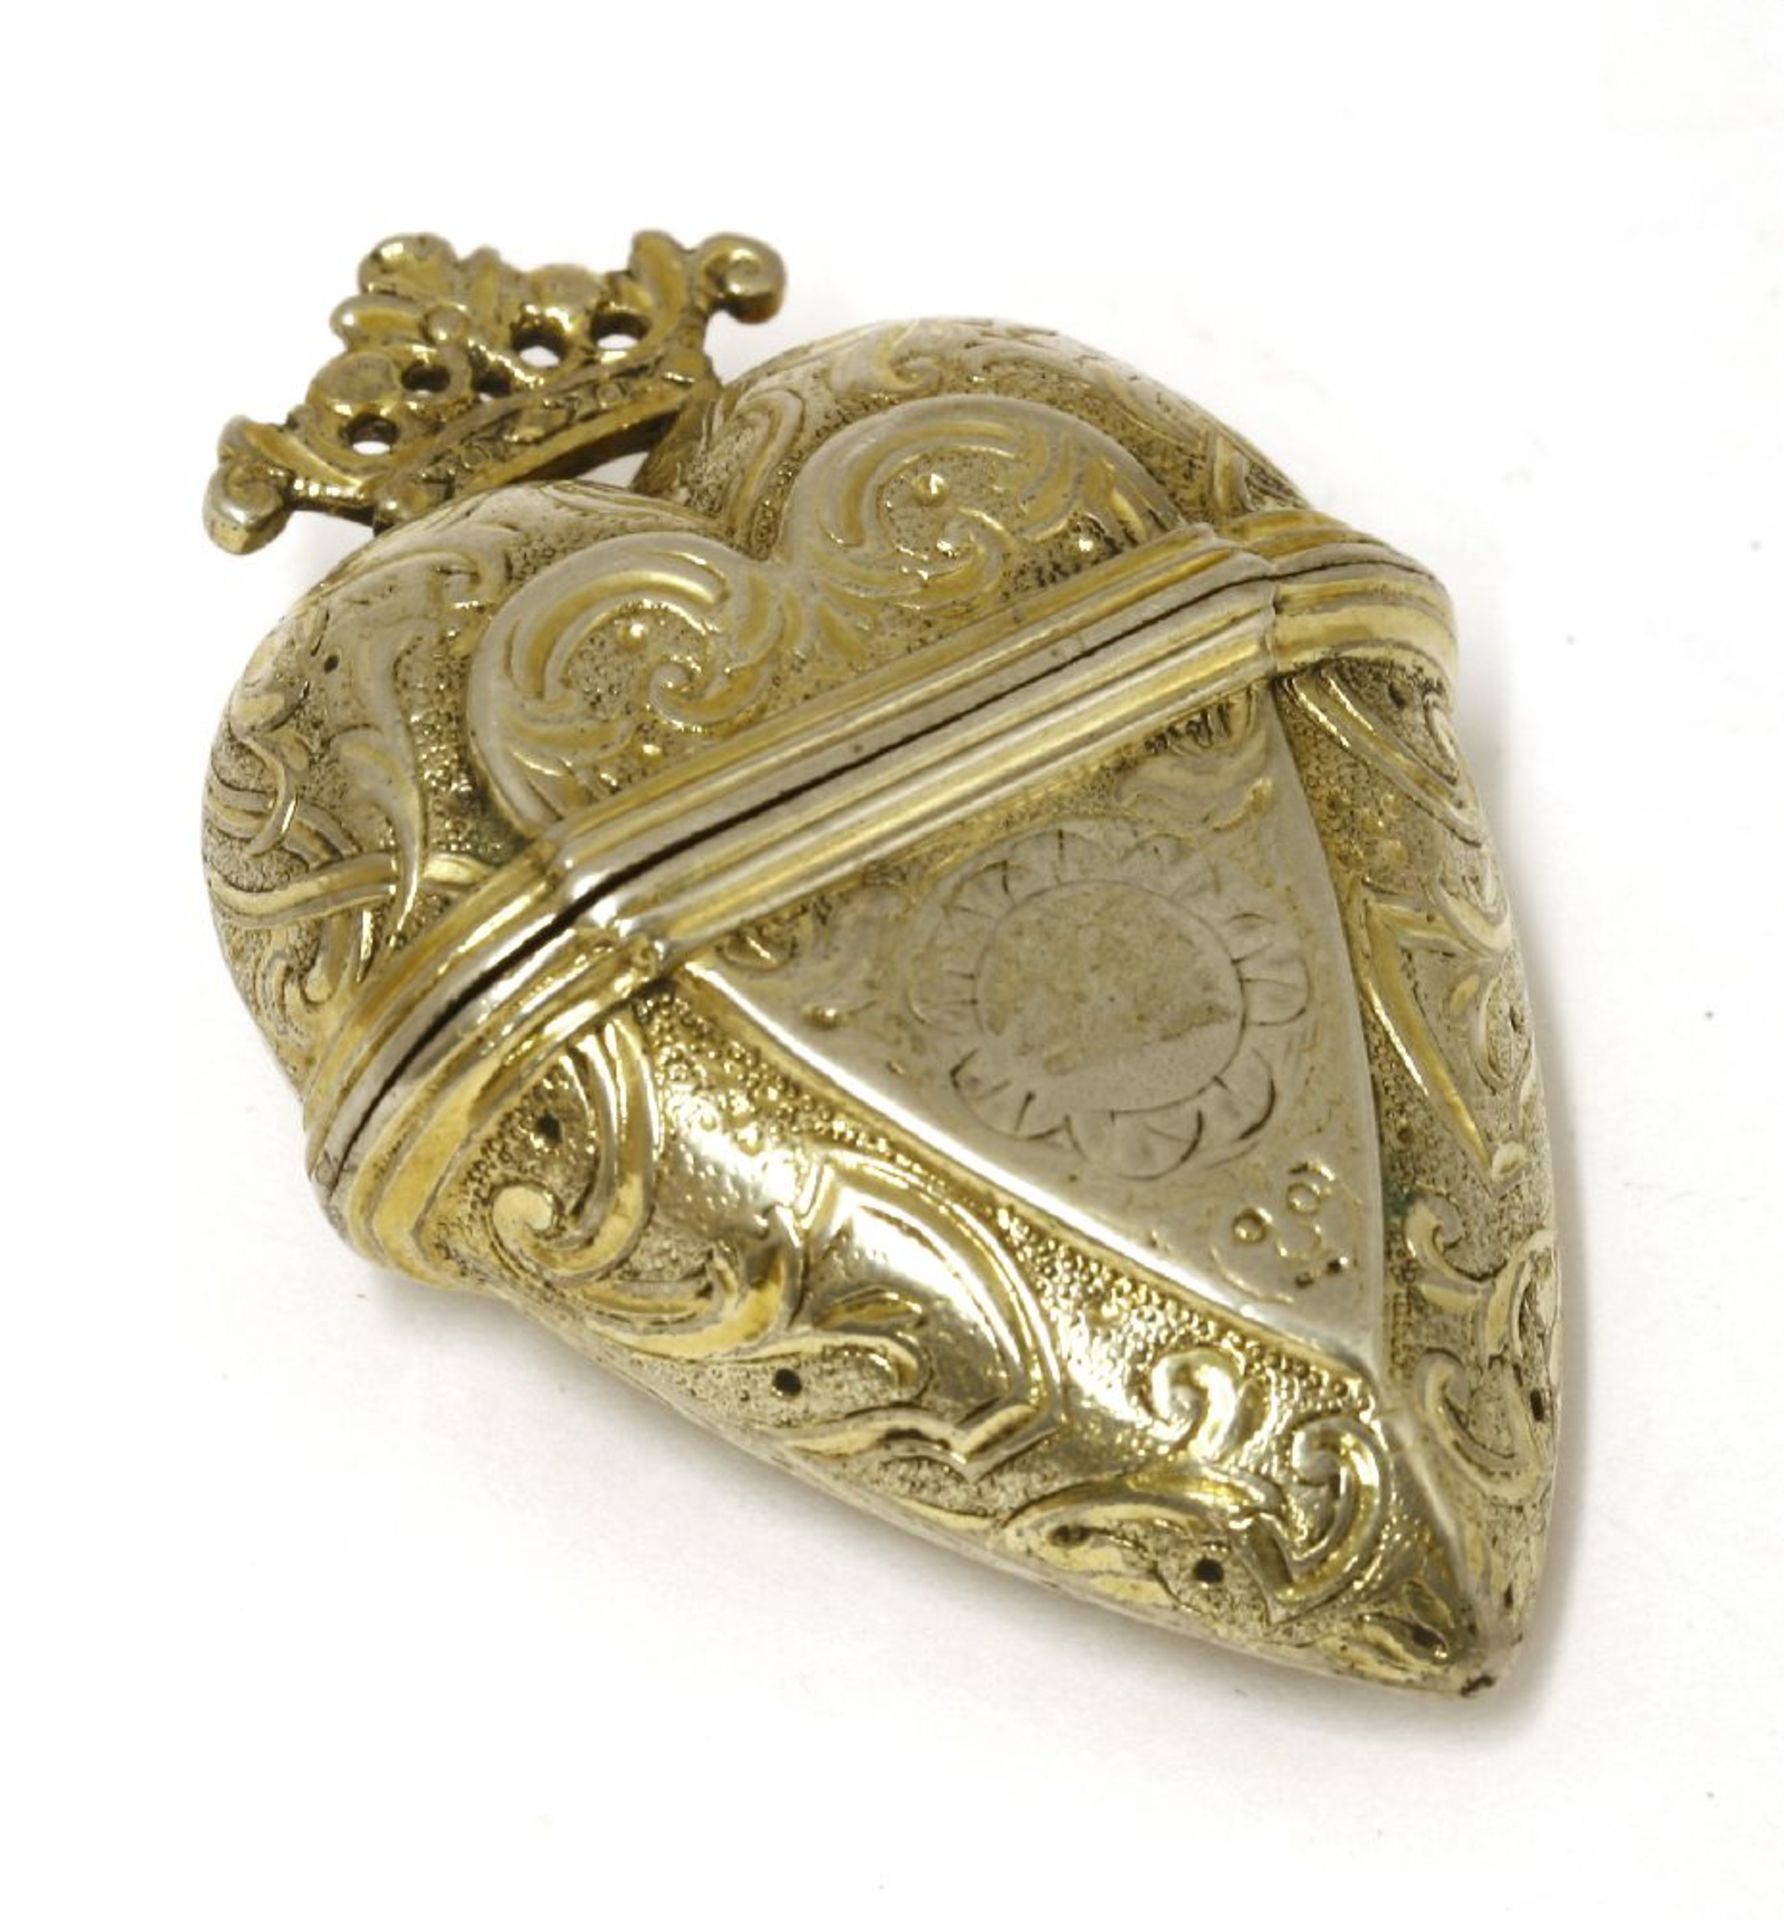 A silver gilt hovedvandsæg,B... M..., probably Danish, 18th century,heart-shaped with engraved